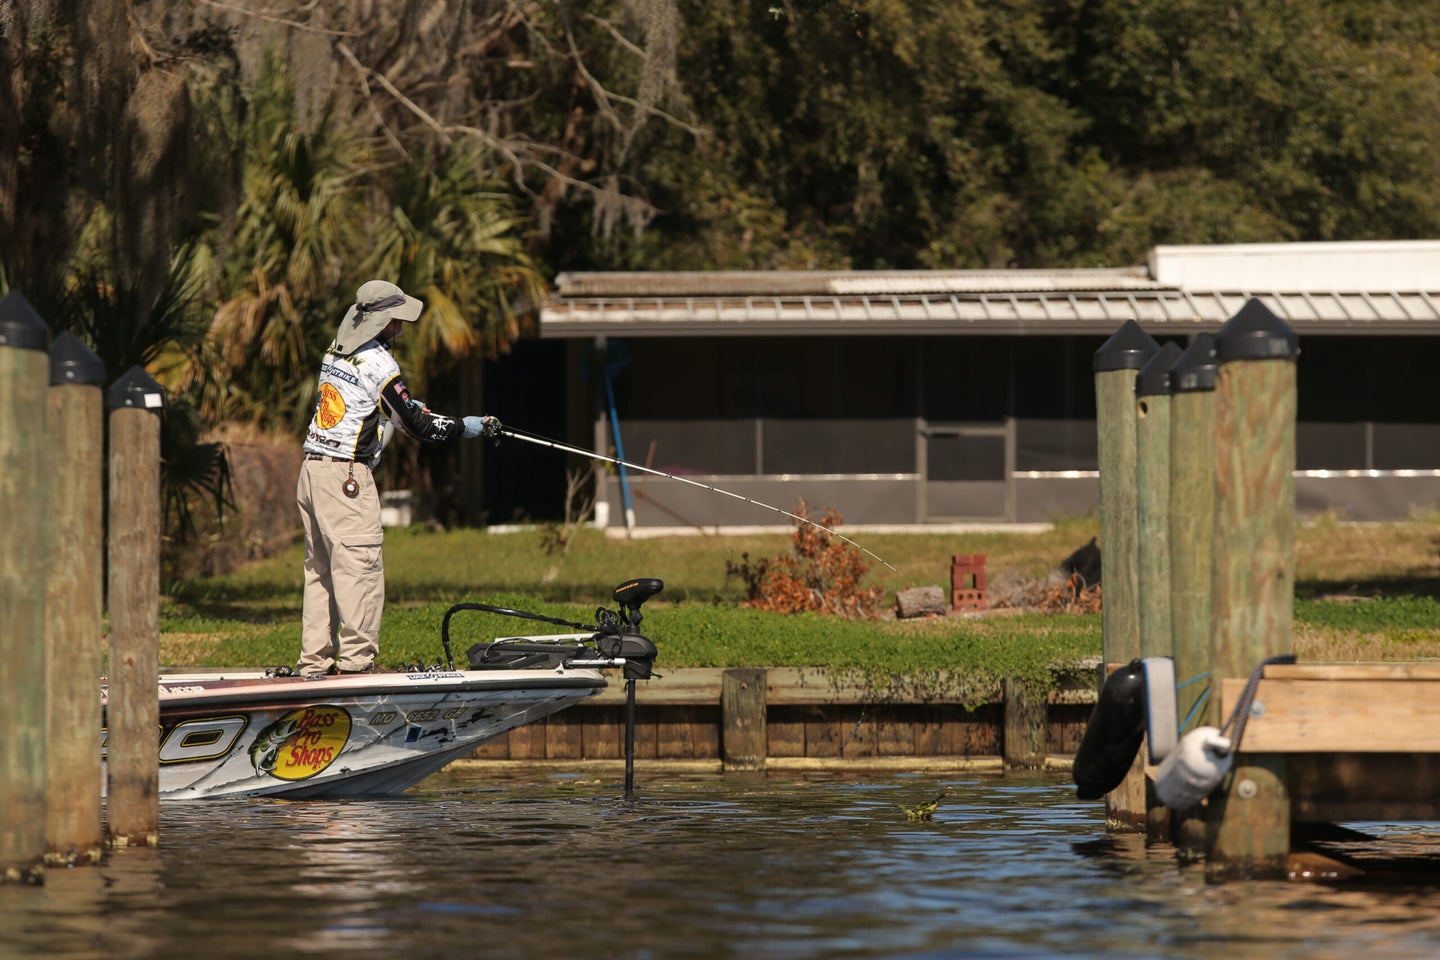 A bass angler fishing off the front of a bass boat.